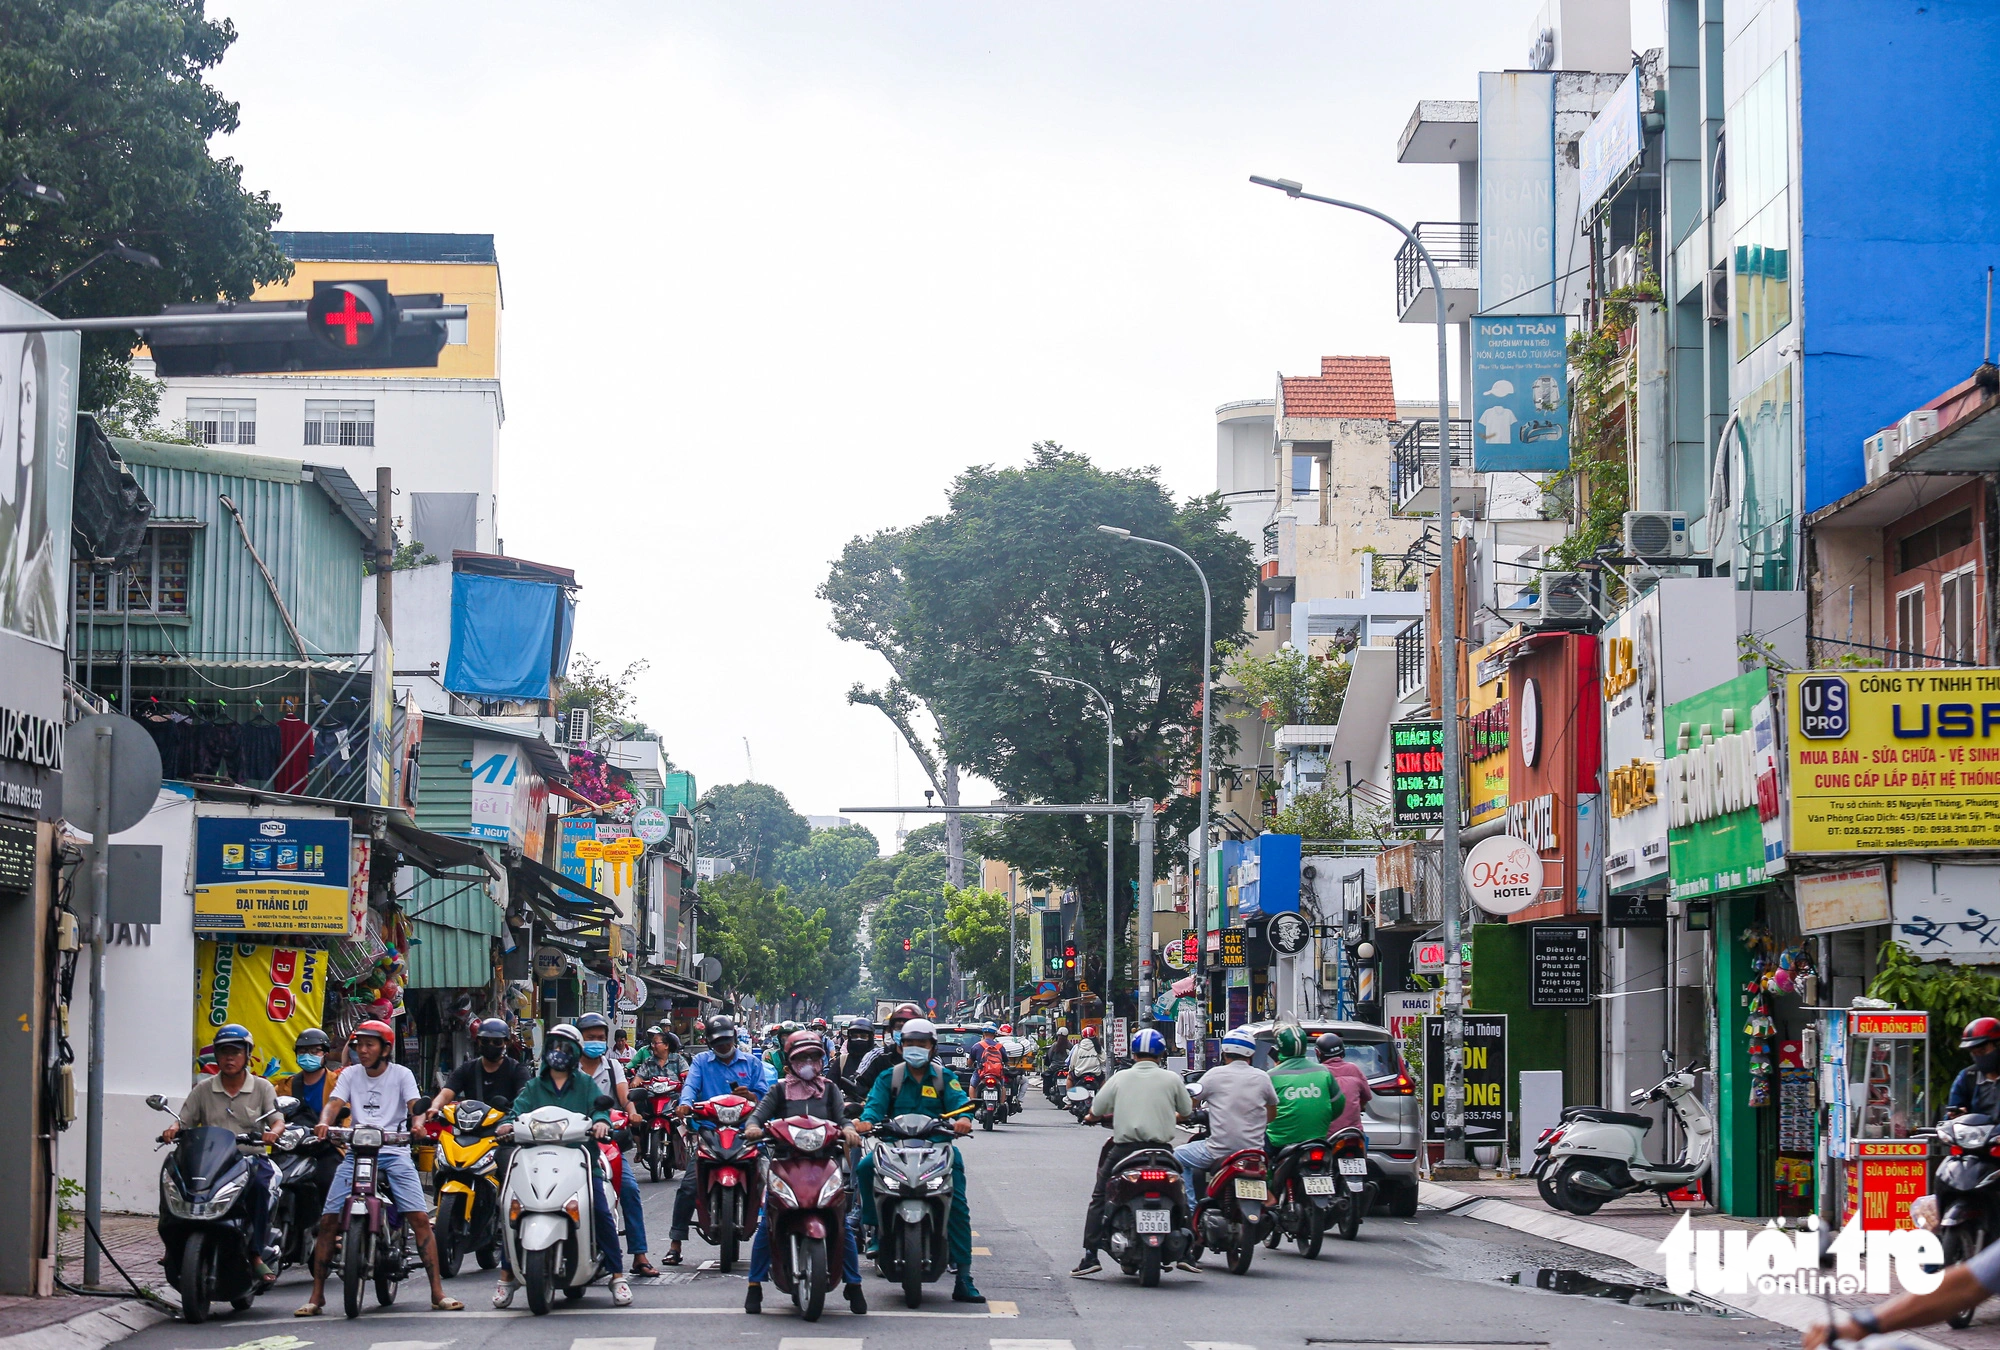 From the Saigon Railway Station, the proposed railway will run to Nguyen Thong Street in District 3. The consultant consortium suggests expanding the street to 25-30 meters from the current 10-12 meters.